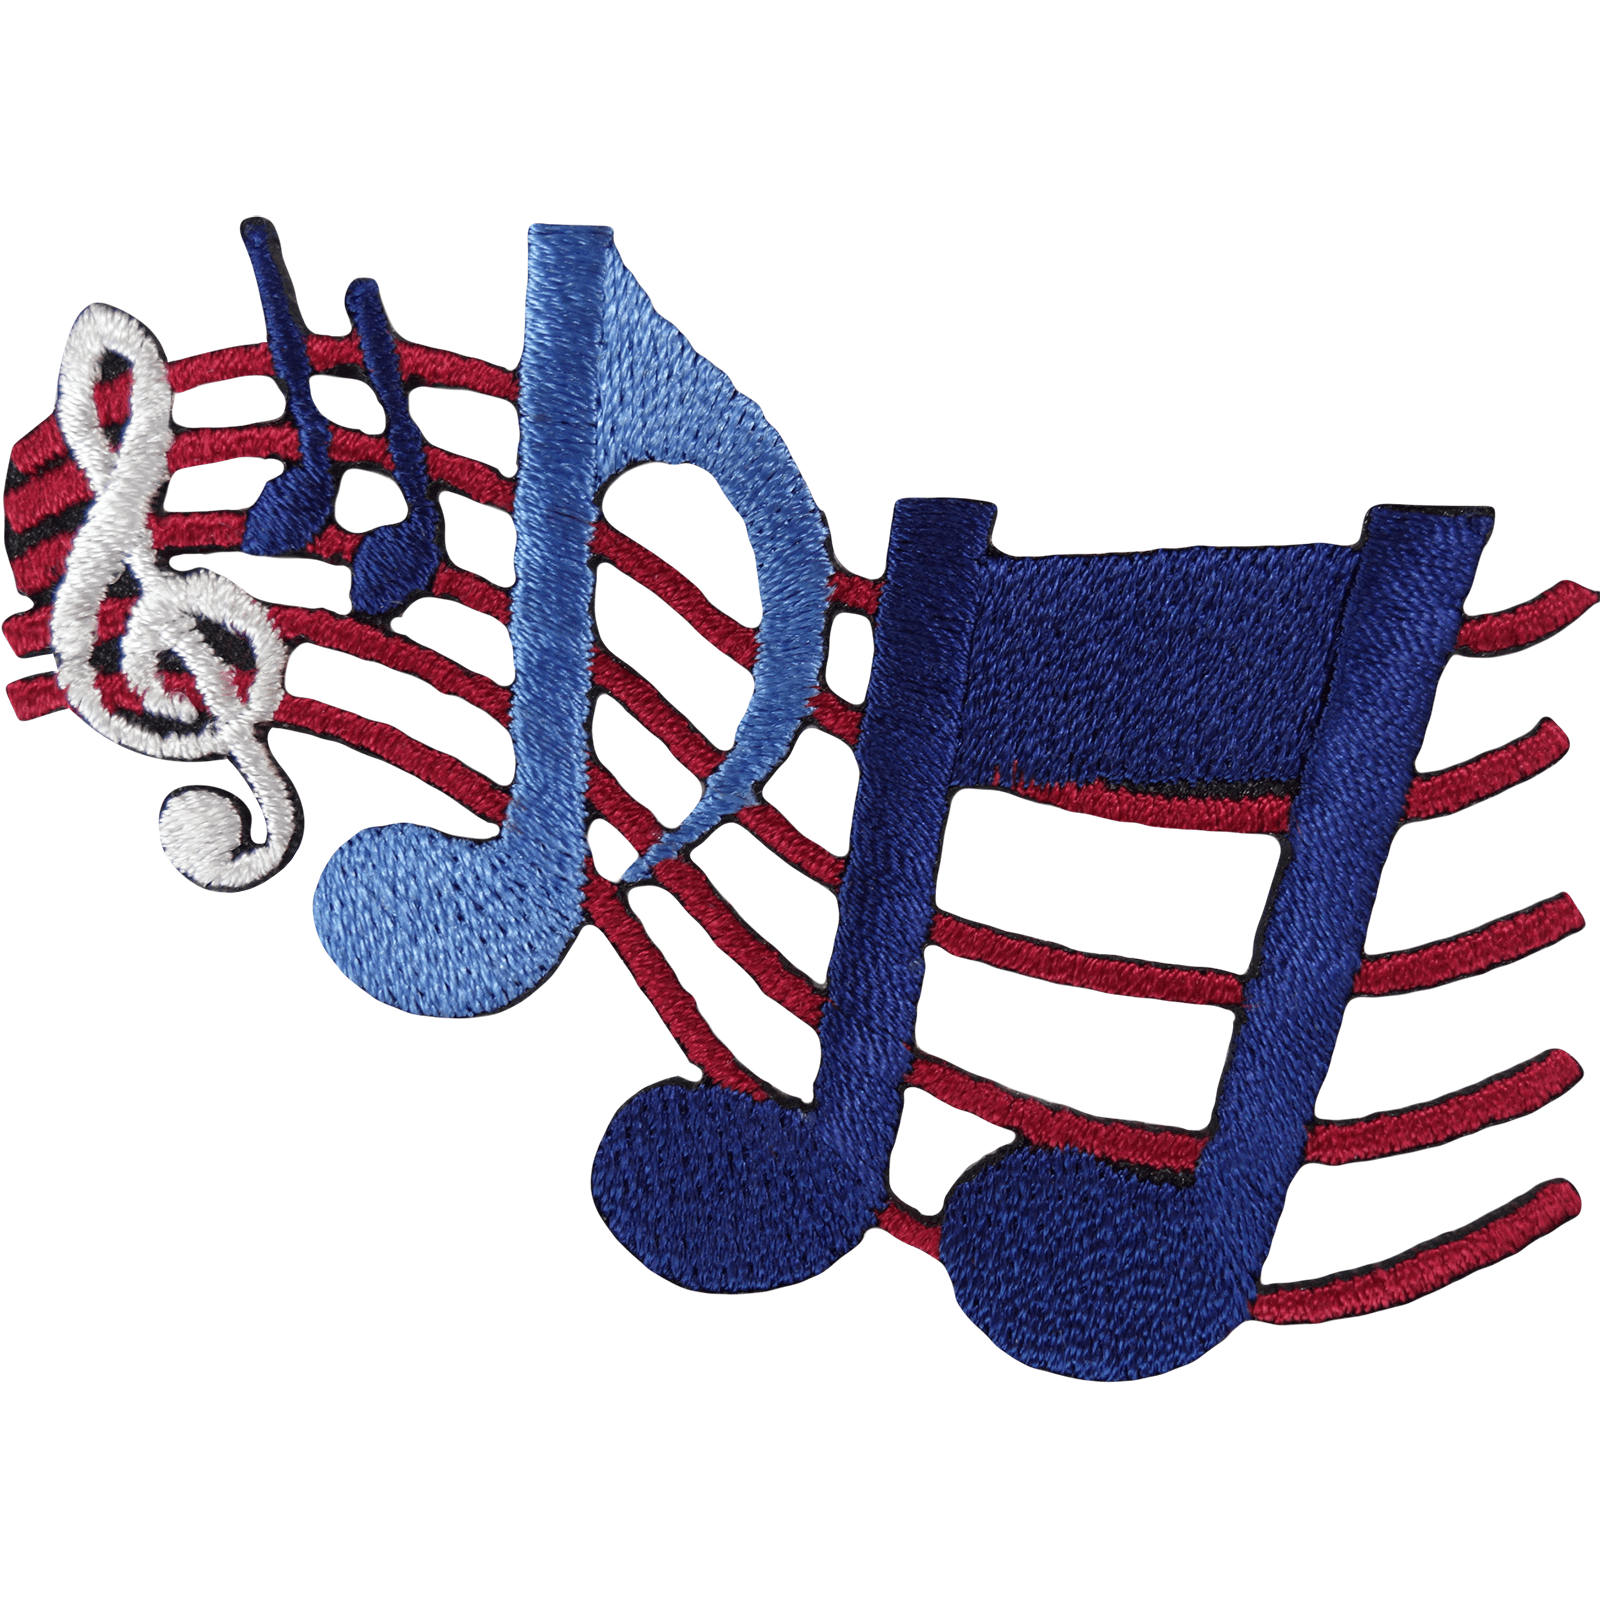 Music Notes Patch Iron Sew On Embroidered Badge Musical Sheet Clothing Applique